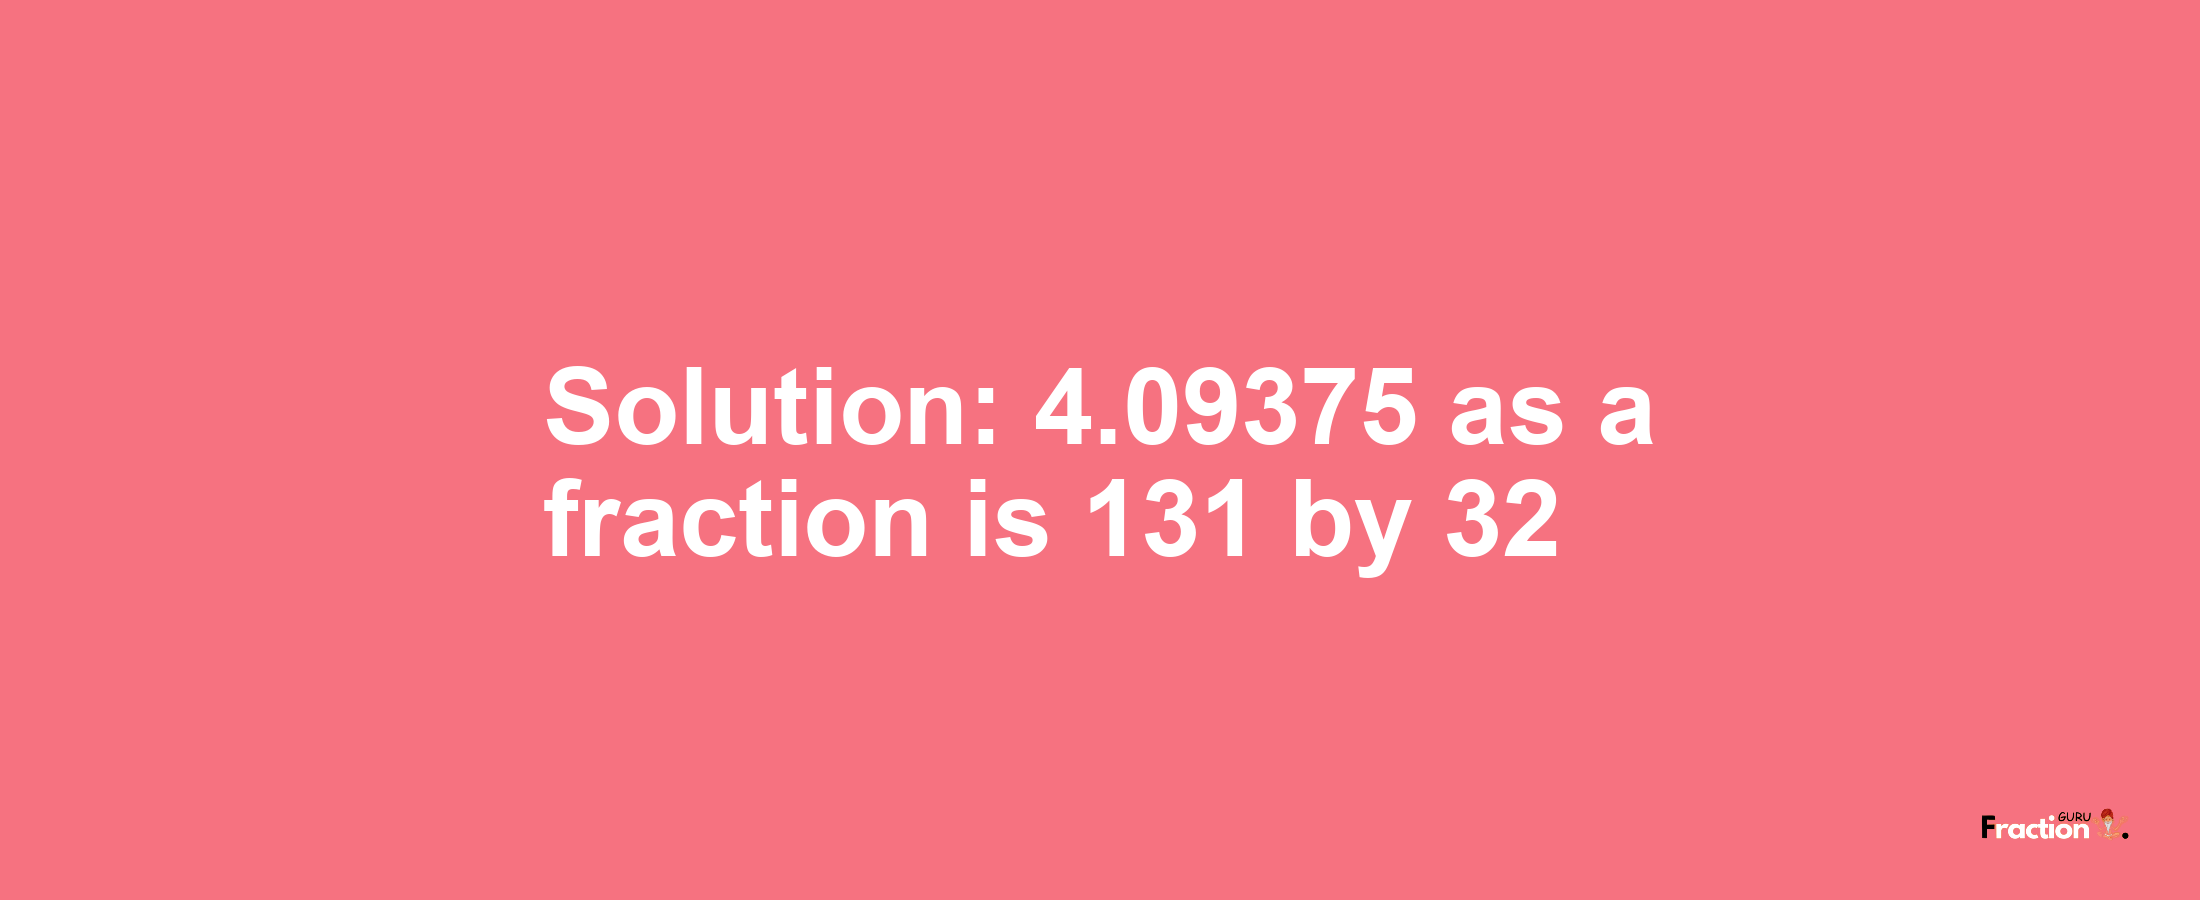 Solution:4.09375 as a fraction is 131/32